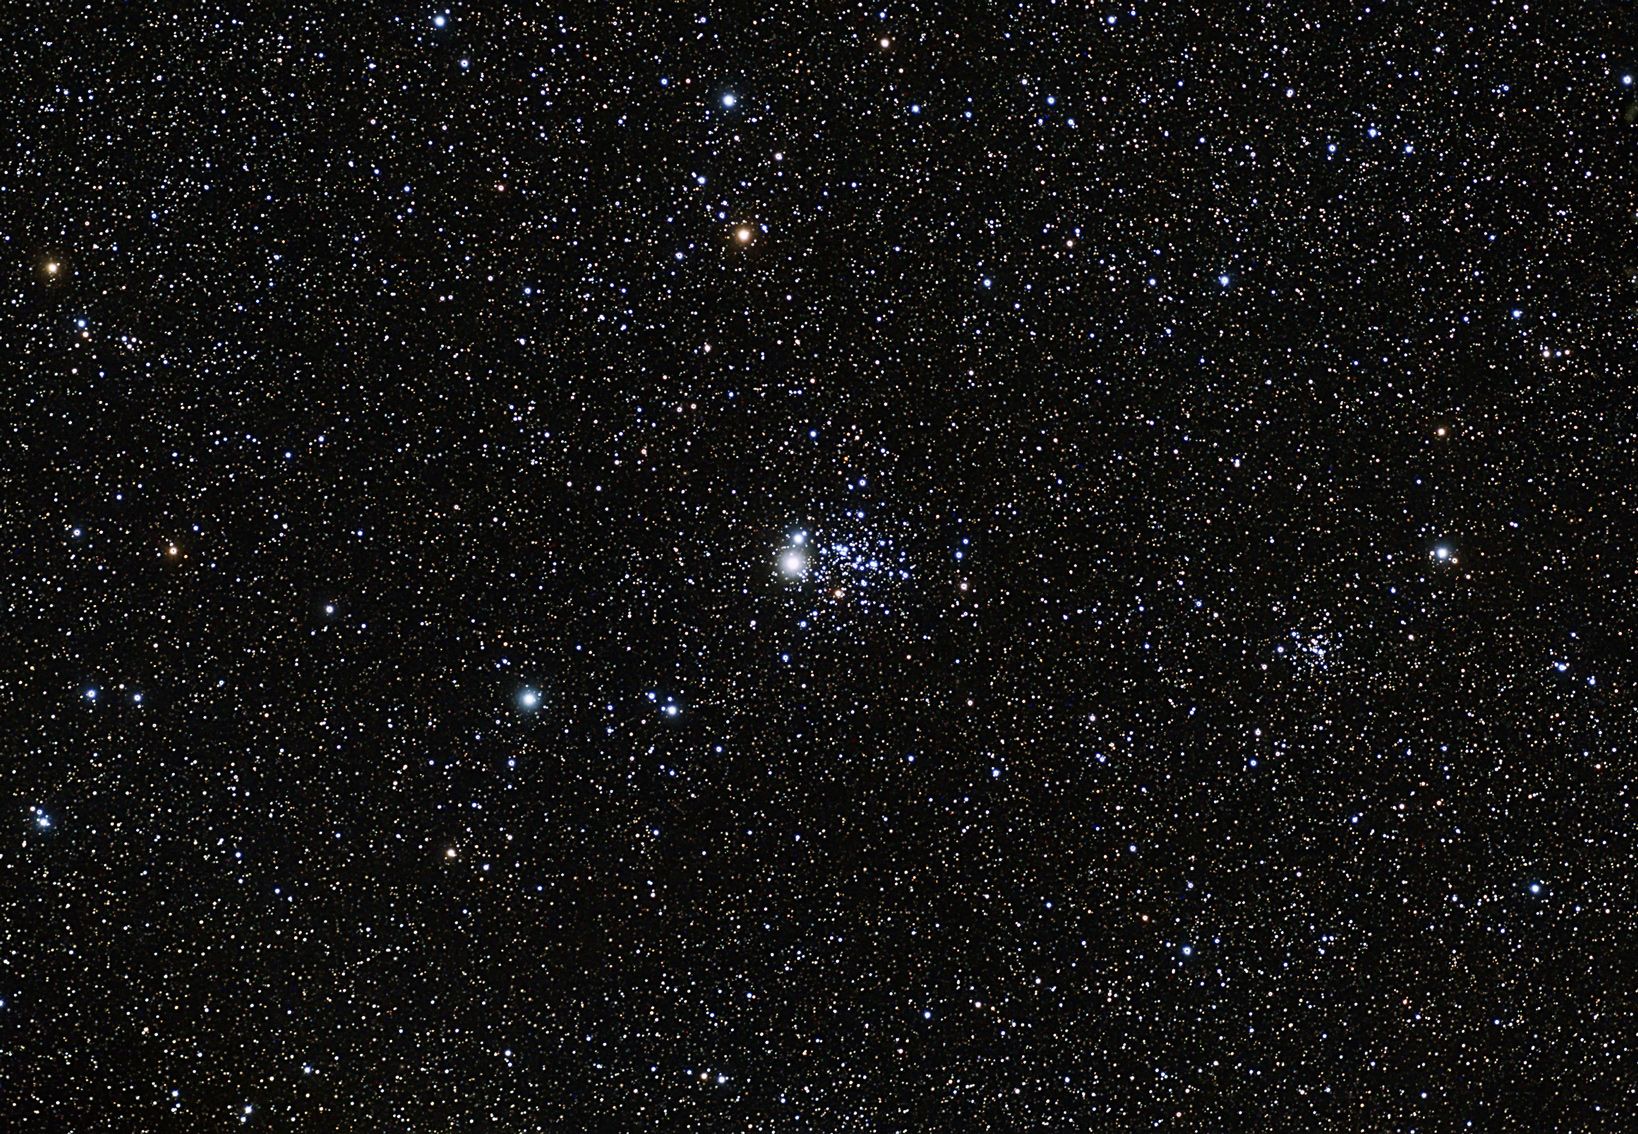 NGC457 - An open cluster in Cassiopeia